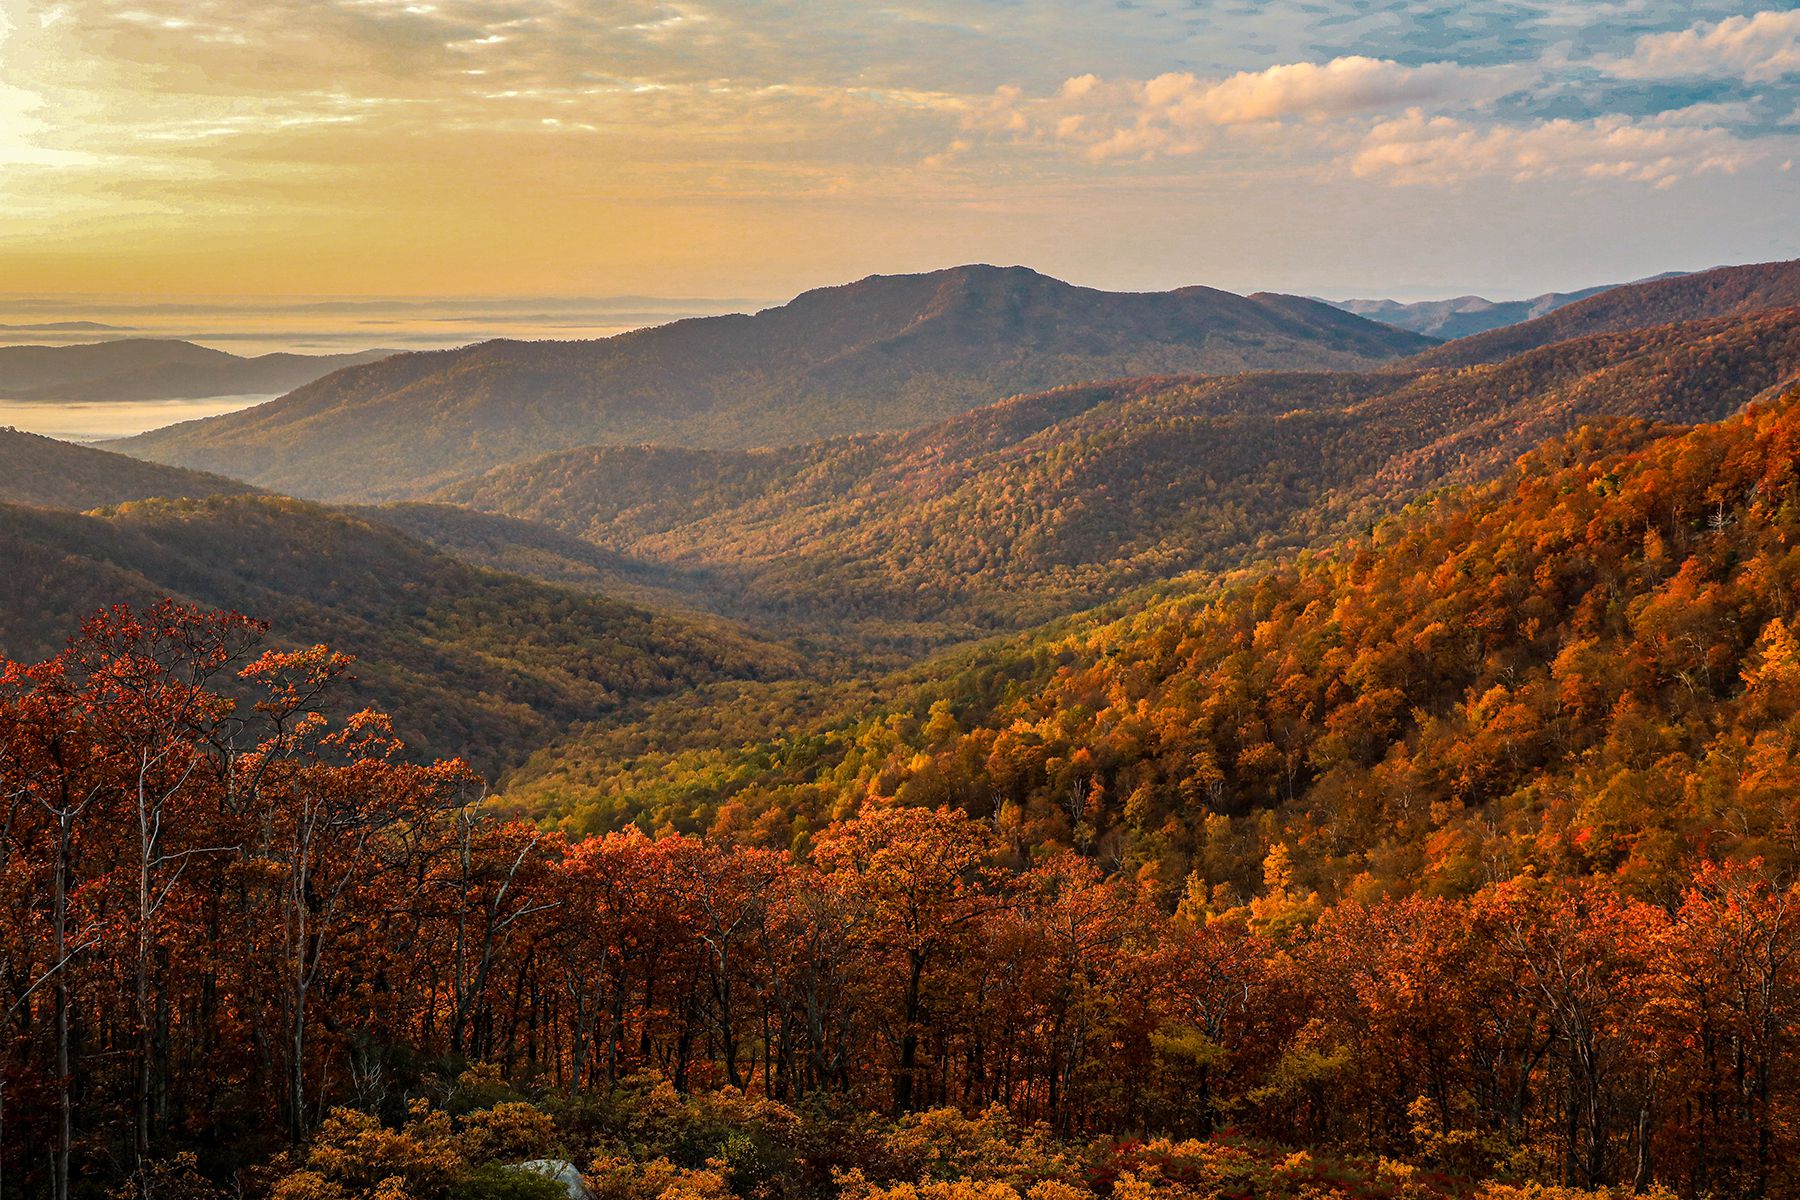 How to Plan the Perfect Trip to the Appalachian Mountains